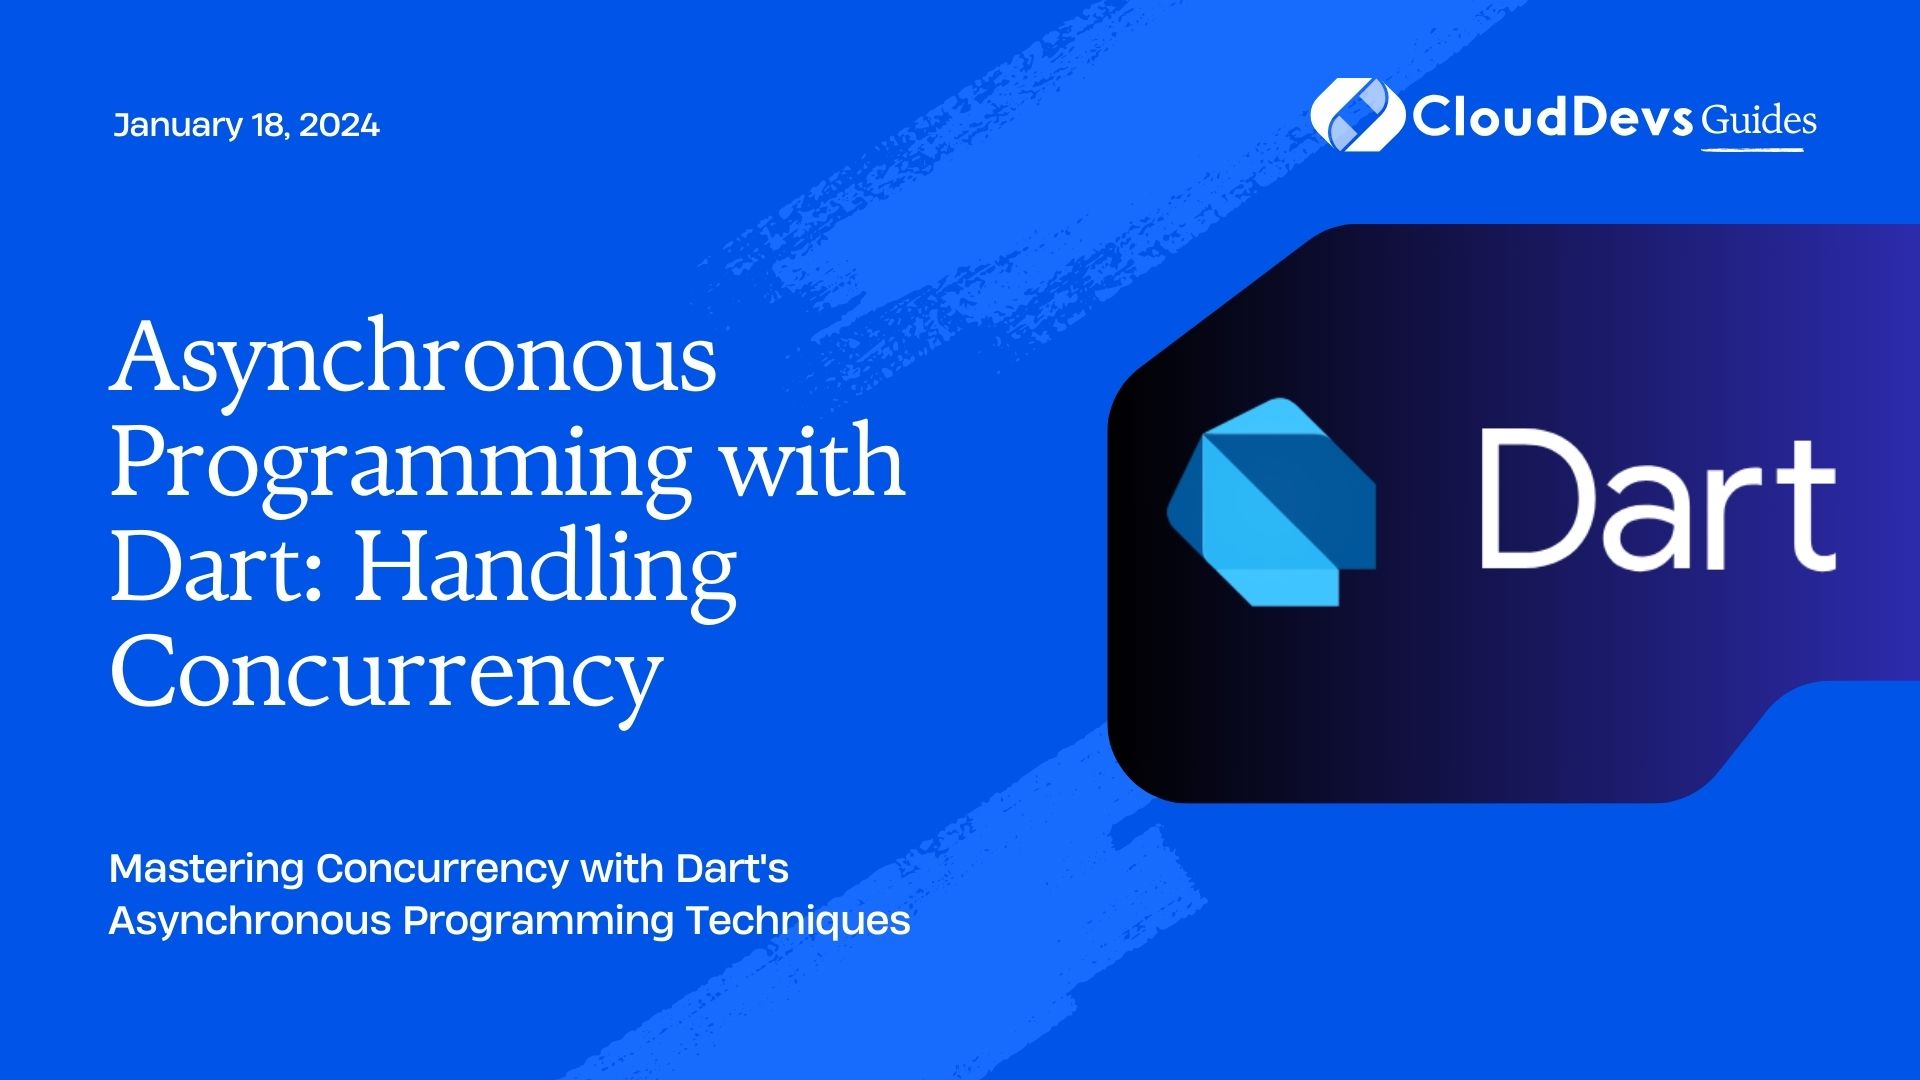 Asynchronous Programming with Dart: Handling Concurrency